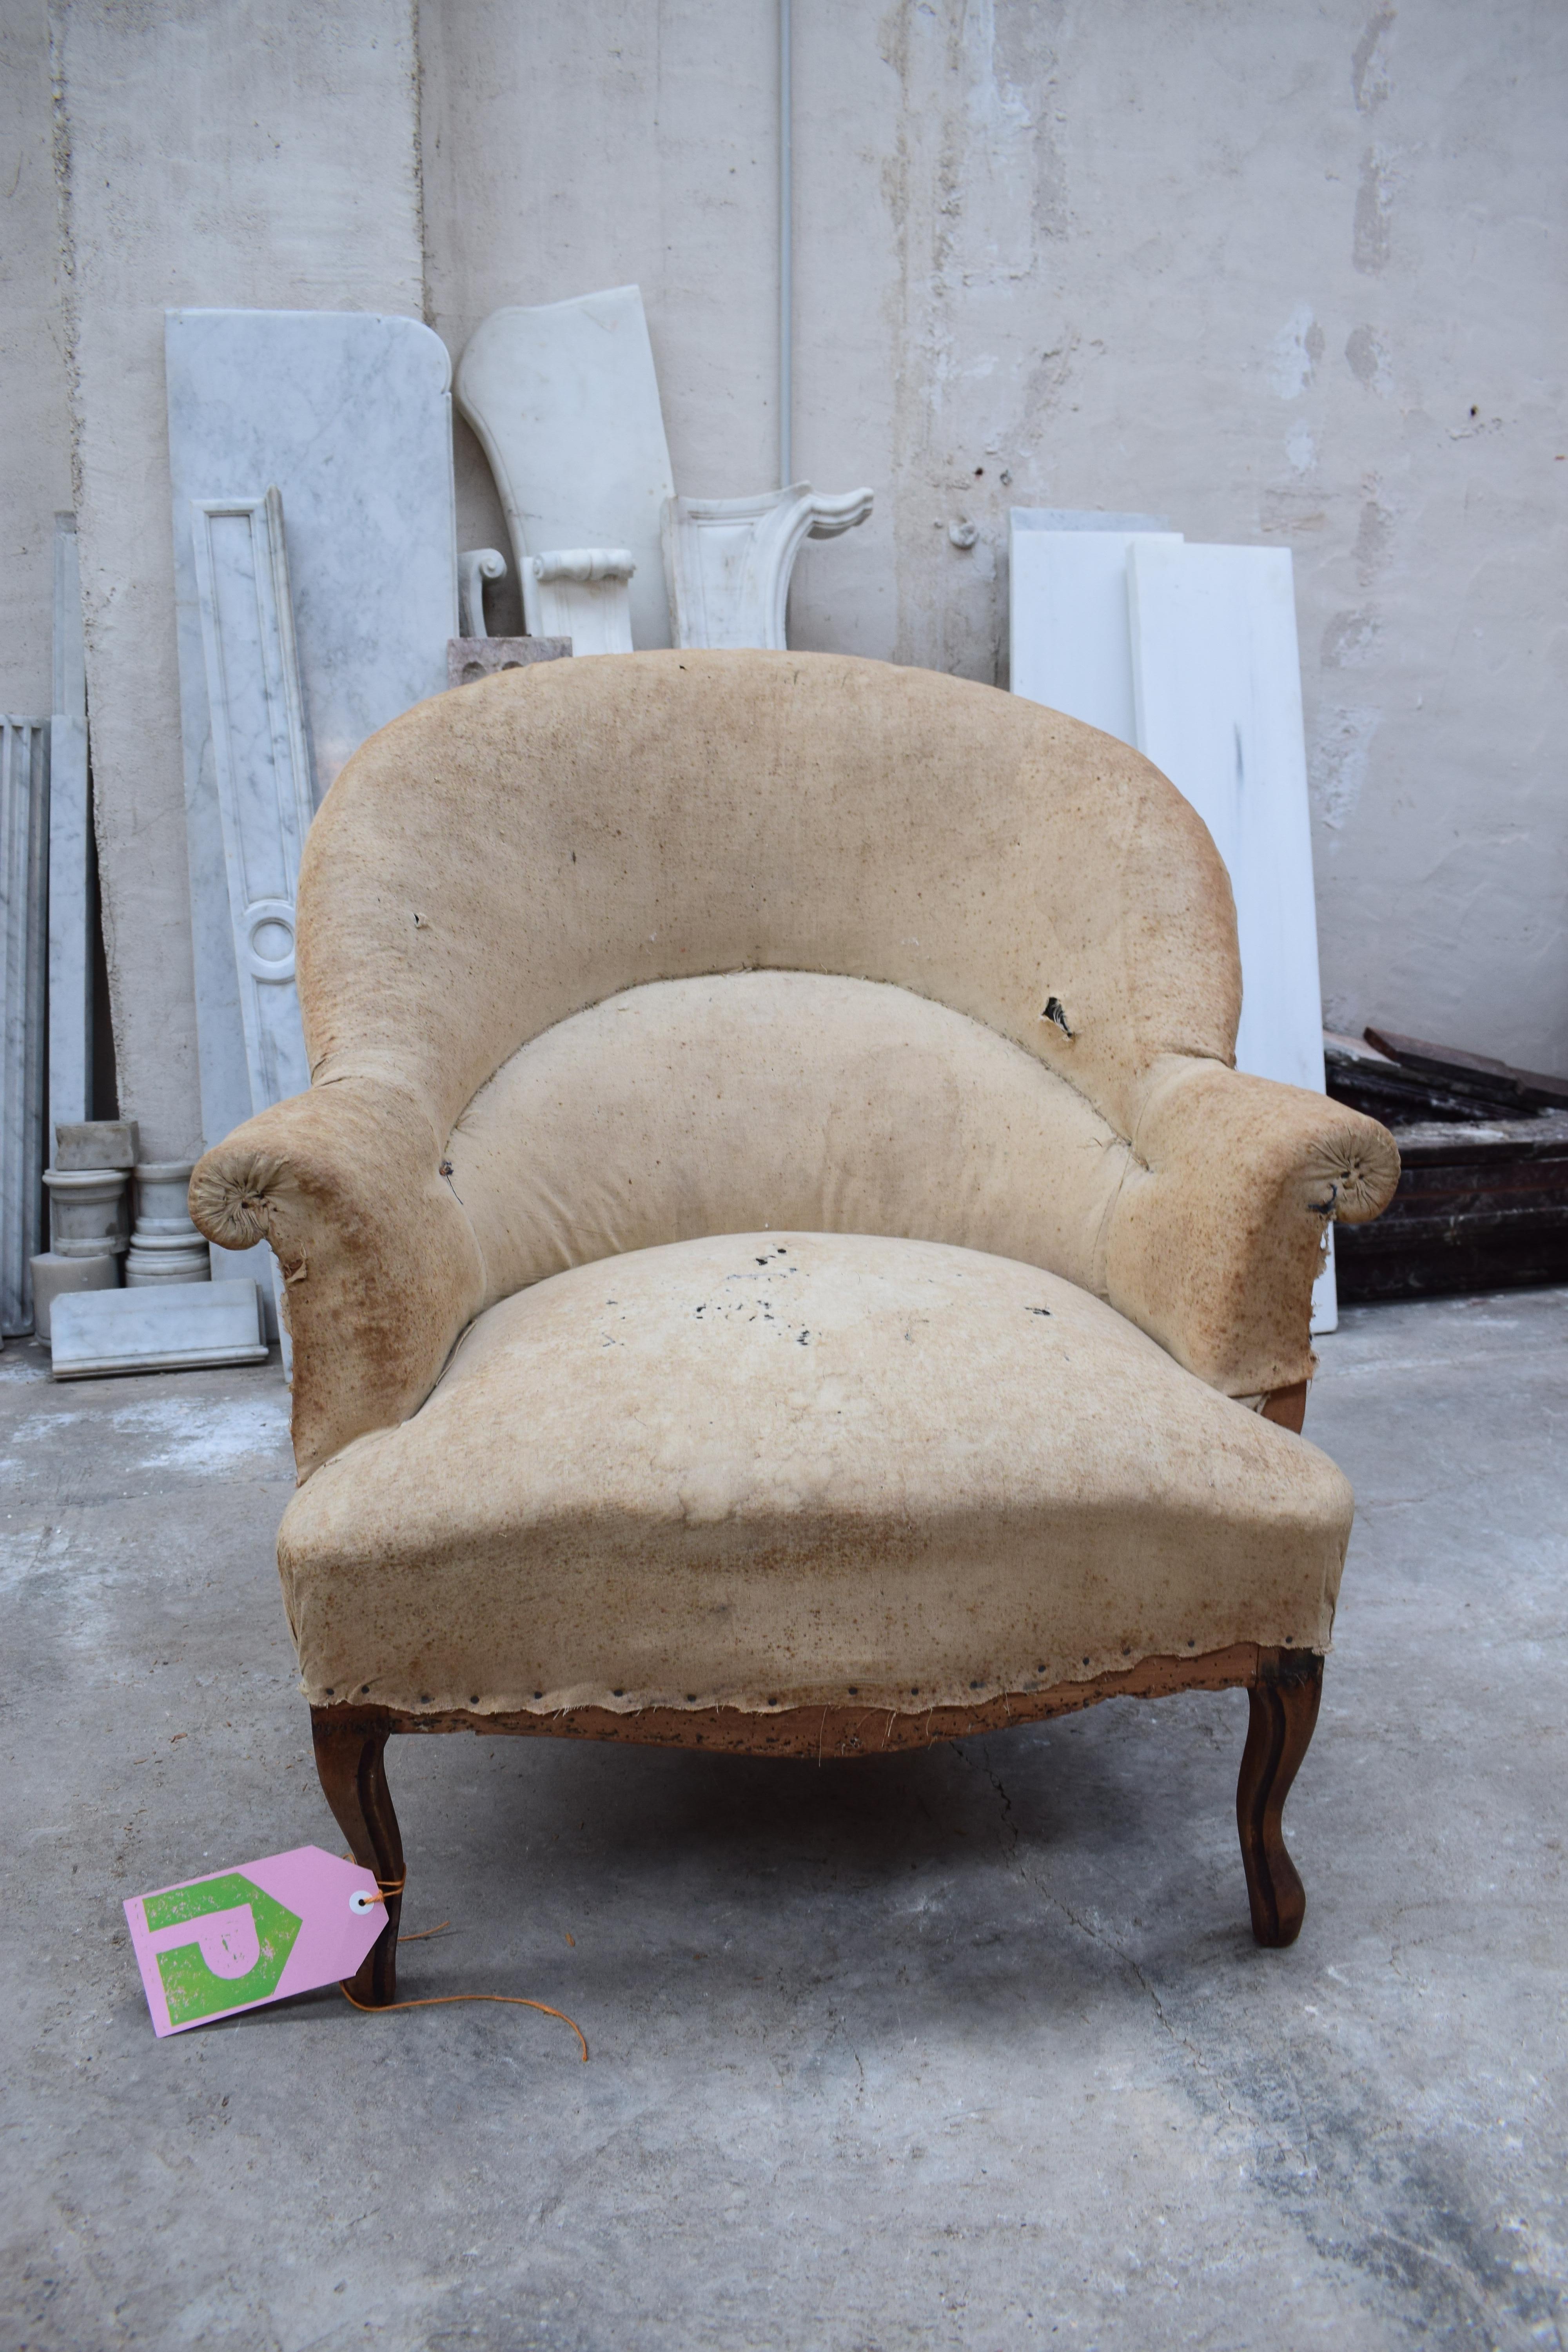 A French Napoleon III style tub chair dating from around 1850. This very comfortable chair is the typical style from the Napoleon III period. It has elegant cabriole legs. The high round back is a fabulous shape and has a great form. The tub chair